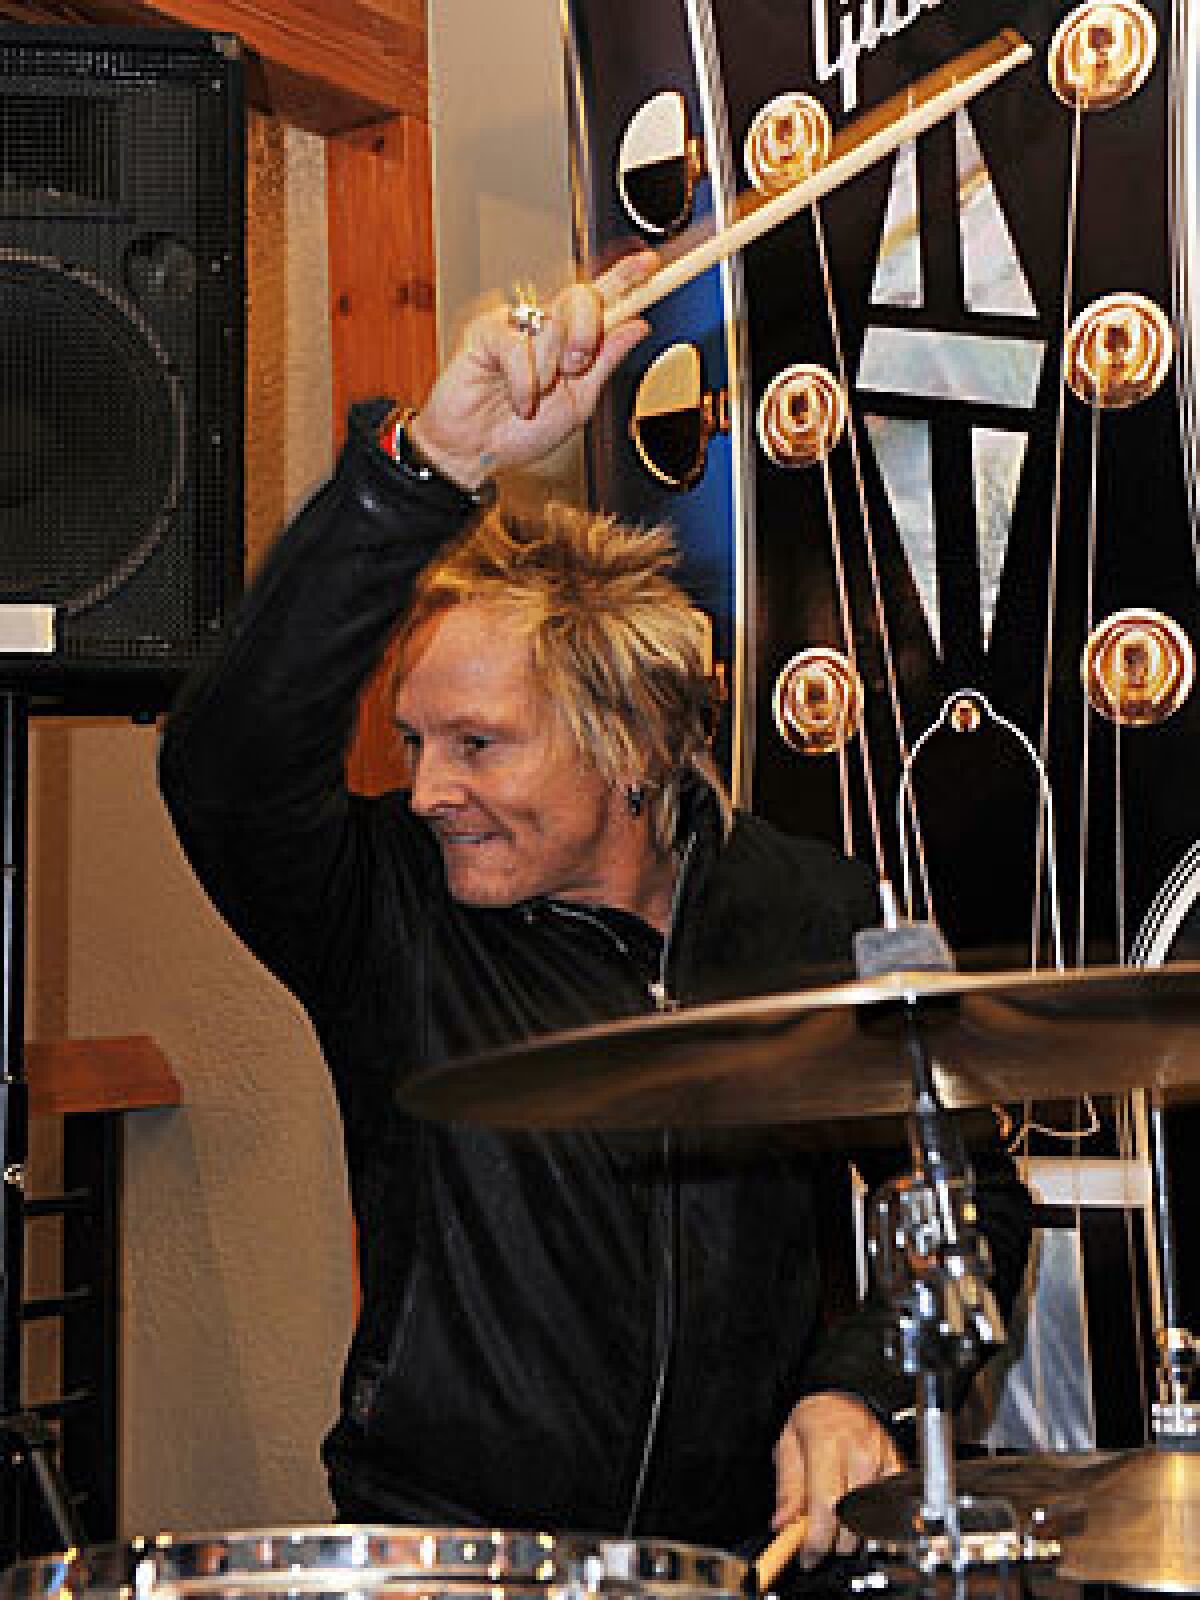 Drummer Matt Sorum hopes to sell his recently remodeled four-bedroom, three-bathroom home of 2,450 square feet.